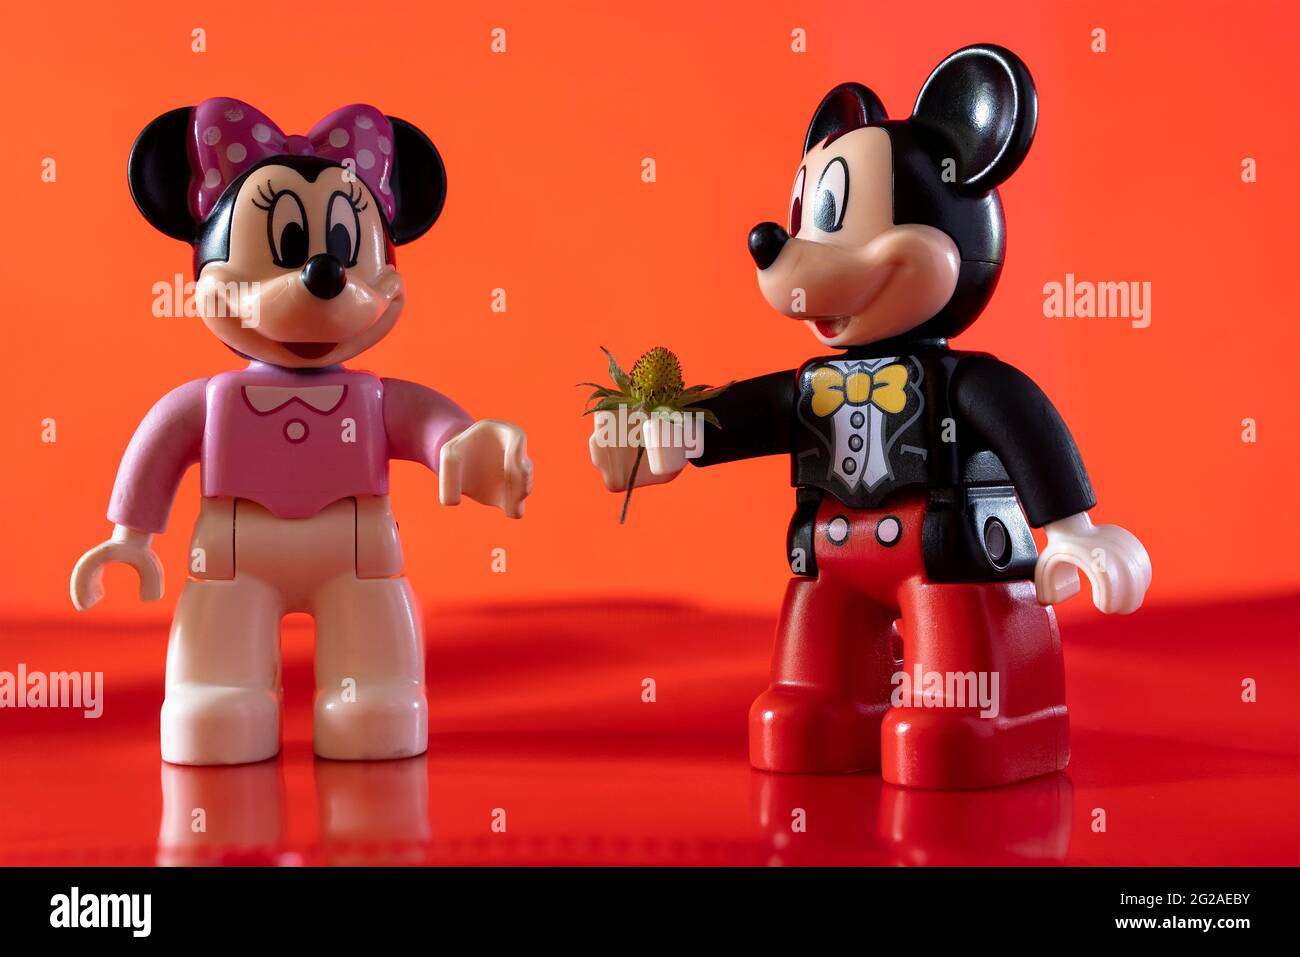 New York, USA - May 25, 2021: A close up shot of a miniature famous Disney character Mickey Mouse Disney character handing over a flower to Minnie Mou Stock Photo